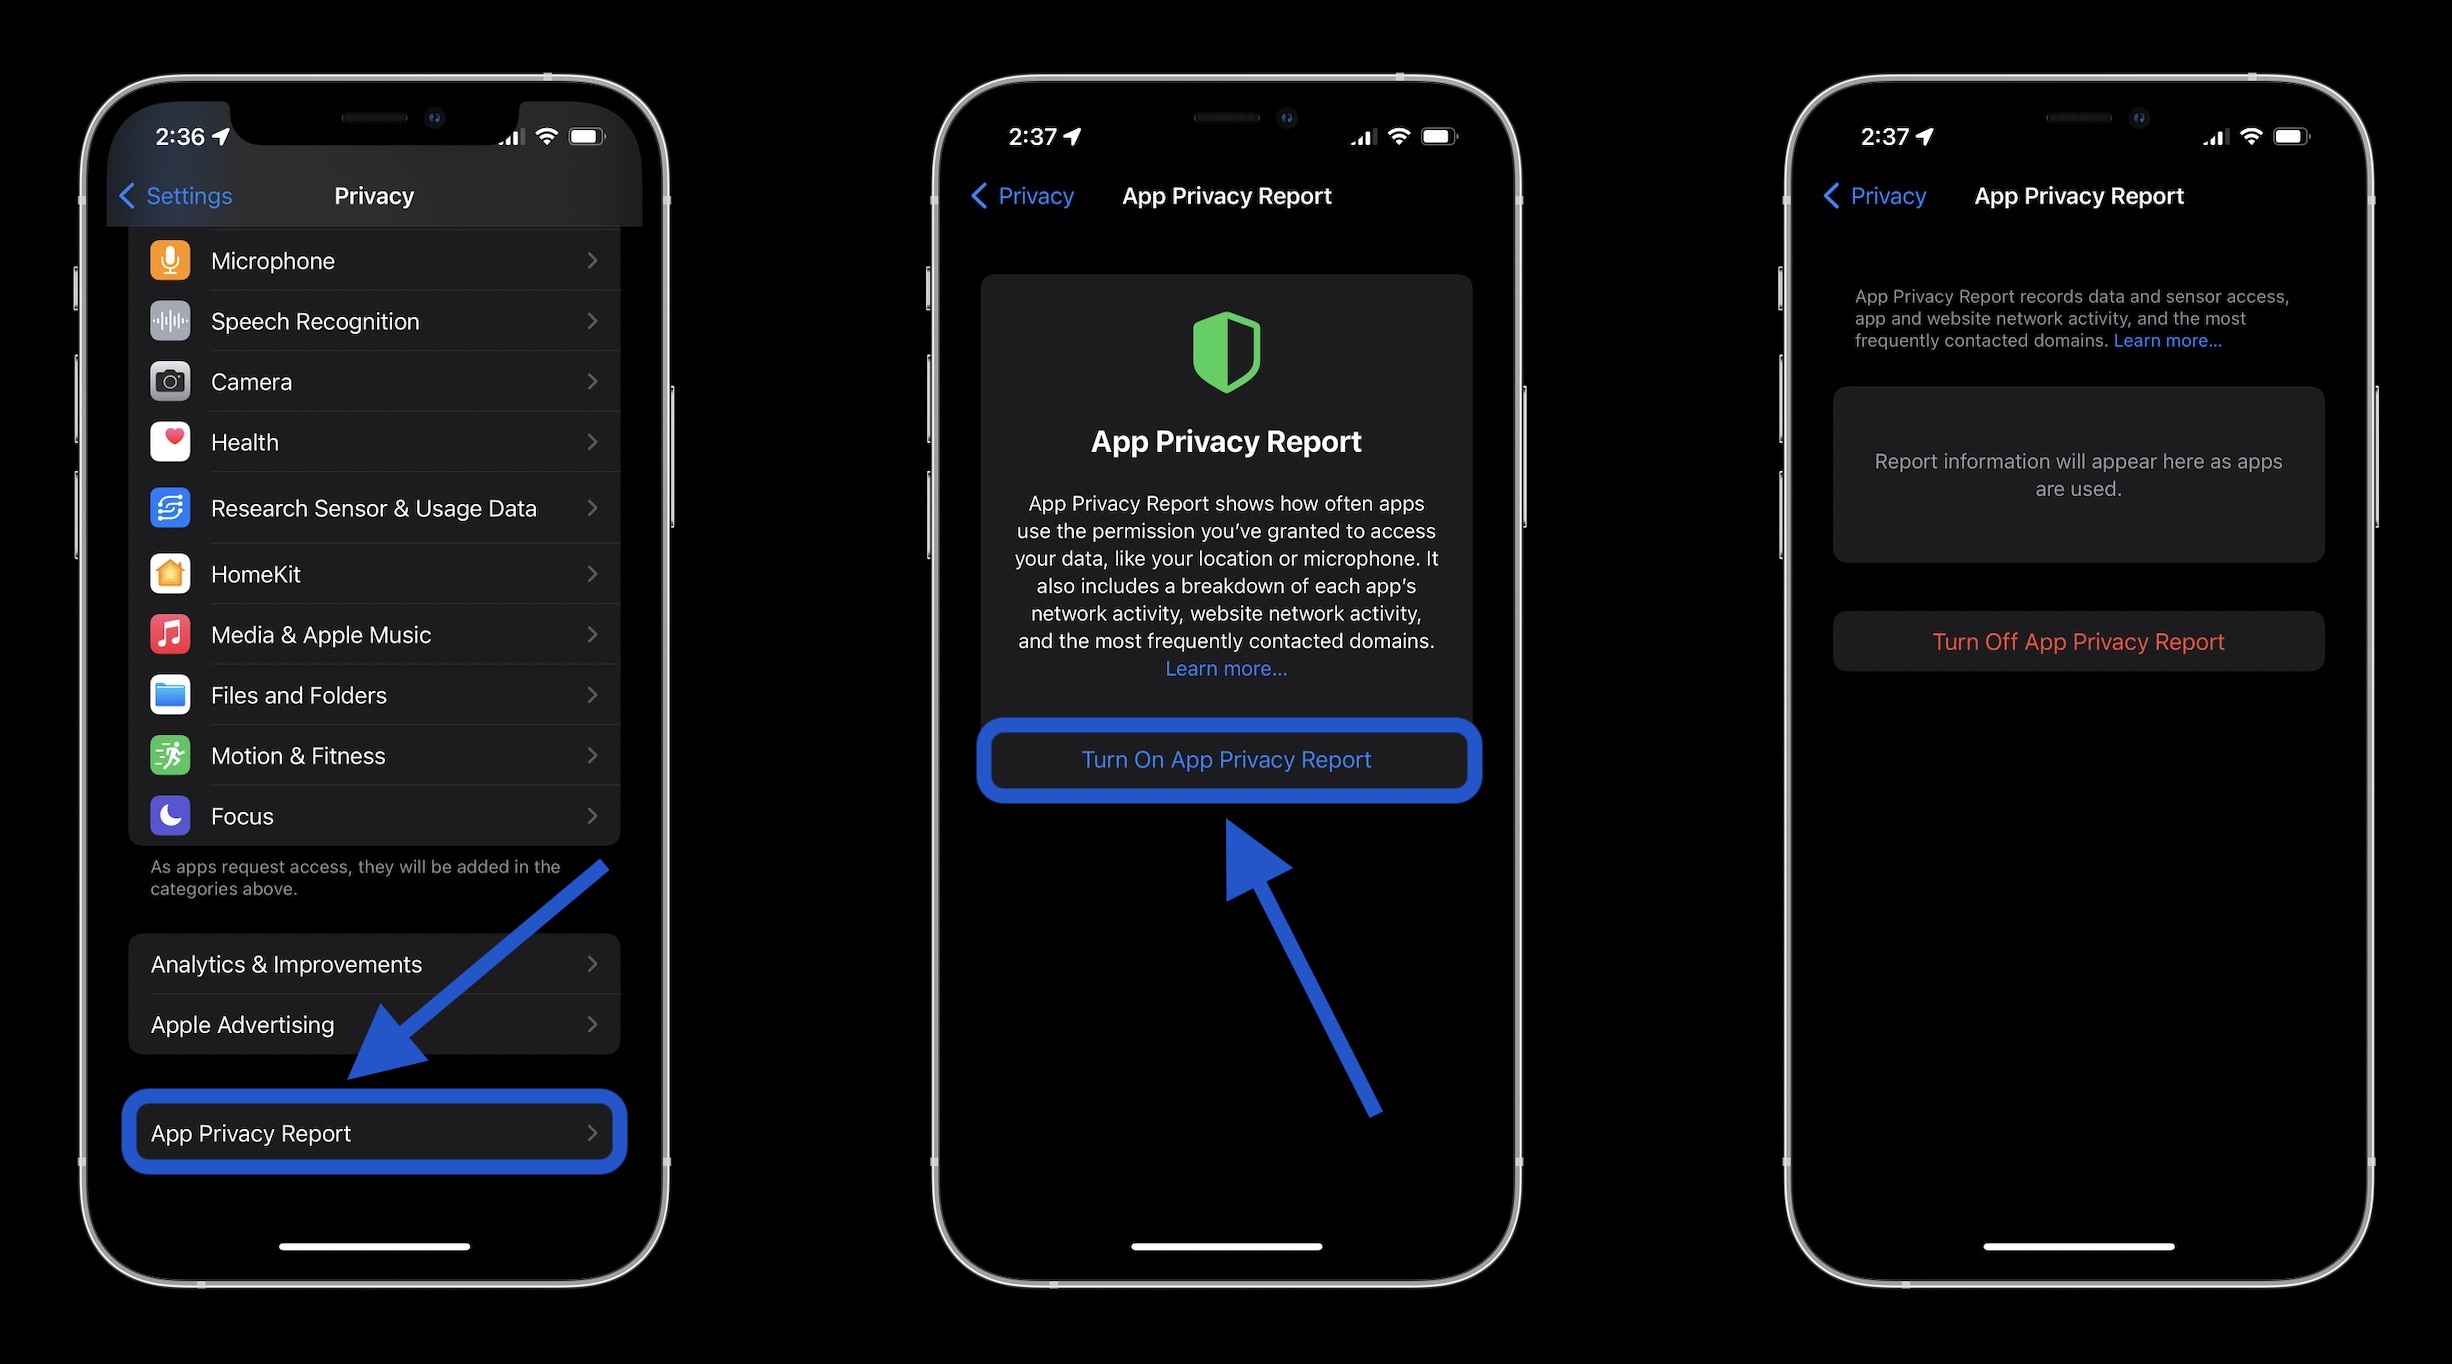 How to turn on iPhone App Privacy Report - Settings > Privateness > App Privateness Report – ON” class=”wp-image-775699″ srcset=”https://9to5mac.com/wp-content/uploads/websites/6/2021/12/how-to-turn-on-iphone-app-privacy-report-walkthrough-2.jpg 2452w, https://9to5mac .com/wp-content/uploads/websites/6/2021/12/how-to-turn-on-iphone-app-privacy-report-walkthrough-2.jpg?resize=155,86 155w, https:// 9to5mac.com/wp-content/uploads/websites/6/2021/12/how-to-turn-on-iphone-app-privacy-report-walkthrough-2.jpg?resize=655364 655w, https://9to5mac .com/wp-content/uploads/websites/6/2021/12/how-to-turn-on-iphone-app-privacy-report-walkthrough-2.jpg?resize=768,427 768w, https://9to5mac. com/wp-content/uploads/websites/6/2021/12/how-to-turn-on-iphone-app-privacy-report-walkthrough-2.jpg?resize=1024,570 1024w, https://9to5mac .com/wp-content/uploads/websites/6/2021/12/how-to-turn-on-iphone-app-privacy-report-walkthrough-2.jpg?resize=1536,854 1536w, https:// 9to5mac.com/wp-content/uploads/websites/6/2021/12/how-to-turn-on-iphone-app-privacy-report-walkthrough-2.jpg?resize=2048,1139 2048w, https:// /9to5mac.com/wp-content/uploads/websites/6/2021/12/how-to-t  urn-on-iphone-app-privacy-report-walkthrough-2.jpg?resize=350195 350w, https://9to5mac.com/wp-content/uploads/websites/6/2021/12/how-to-turn -on-iphone-app-privacy-report-walkthrough-2.jpg?resize=1600,890 1600w, https://9to5mac.com/wp-content/uploads/websites/6/2021/12/how-to- turn-on-iphone-app-privacy-report-walkthrough-2.jpg?resize=150,83 150w” sizes=”(max-width: 2452px) 100vw, 2452px”,</figure>
<p>After you have turned on App Privateness Experiences and used your iPhone for some time, you possibly can return to the identical place to view your experiences.  It should appear like this:</p>
<figure class=